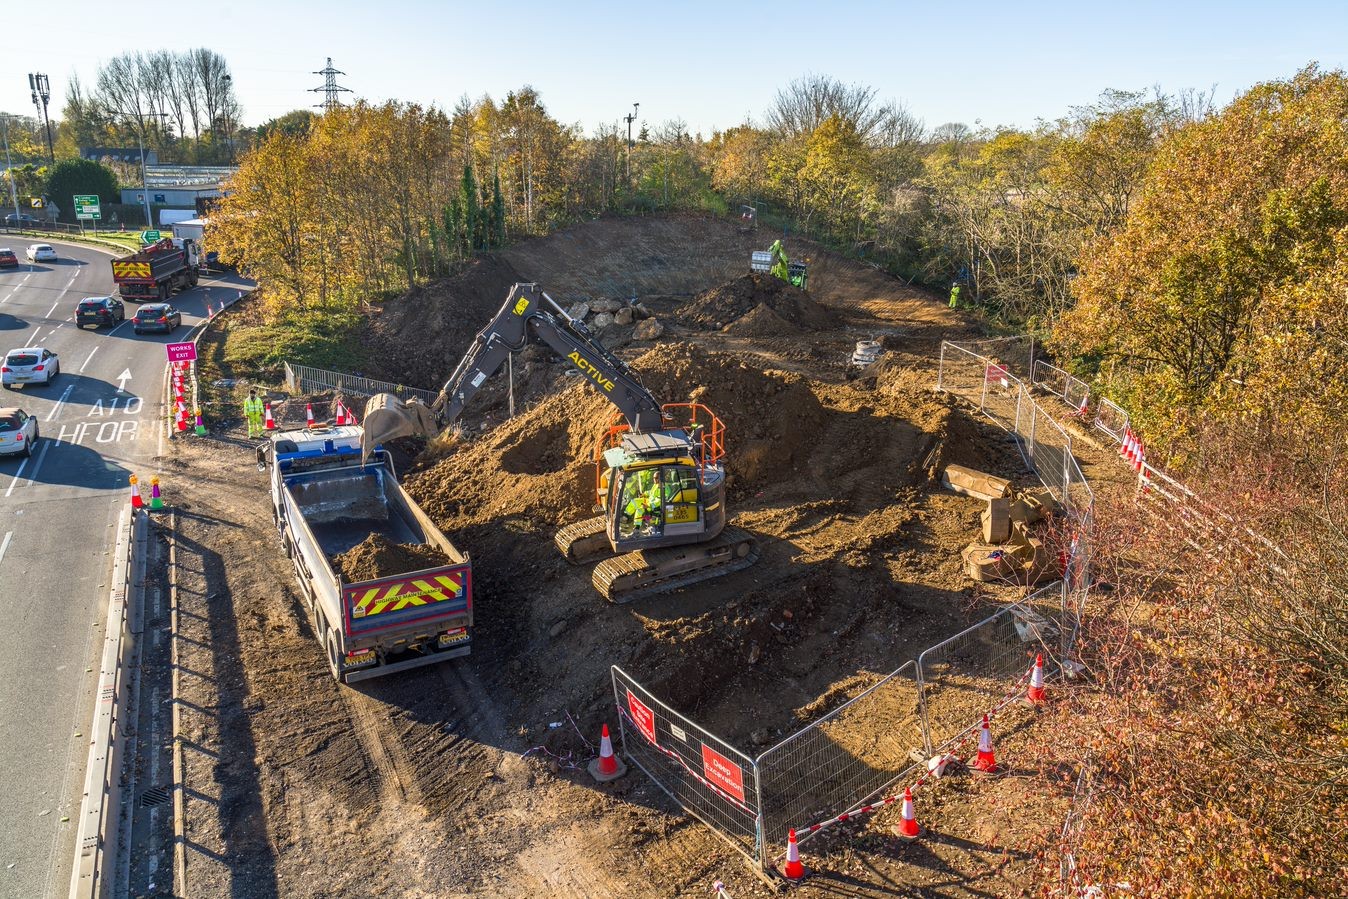 Work on the M25 Junction 25